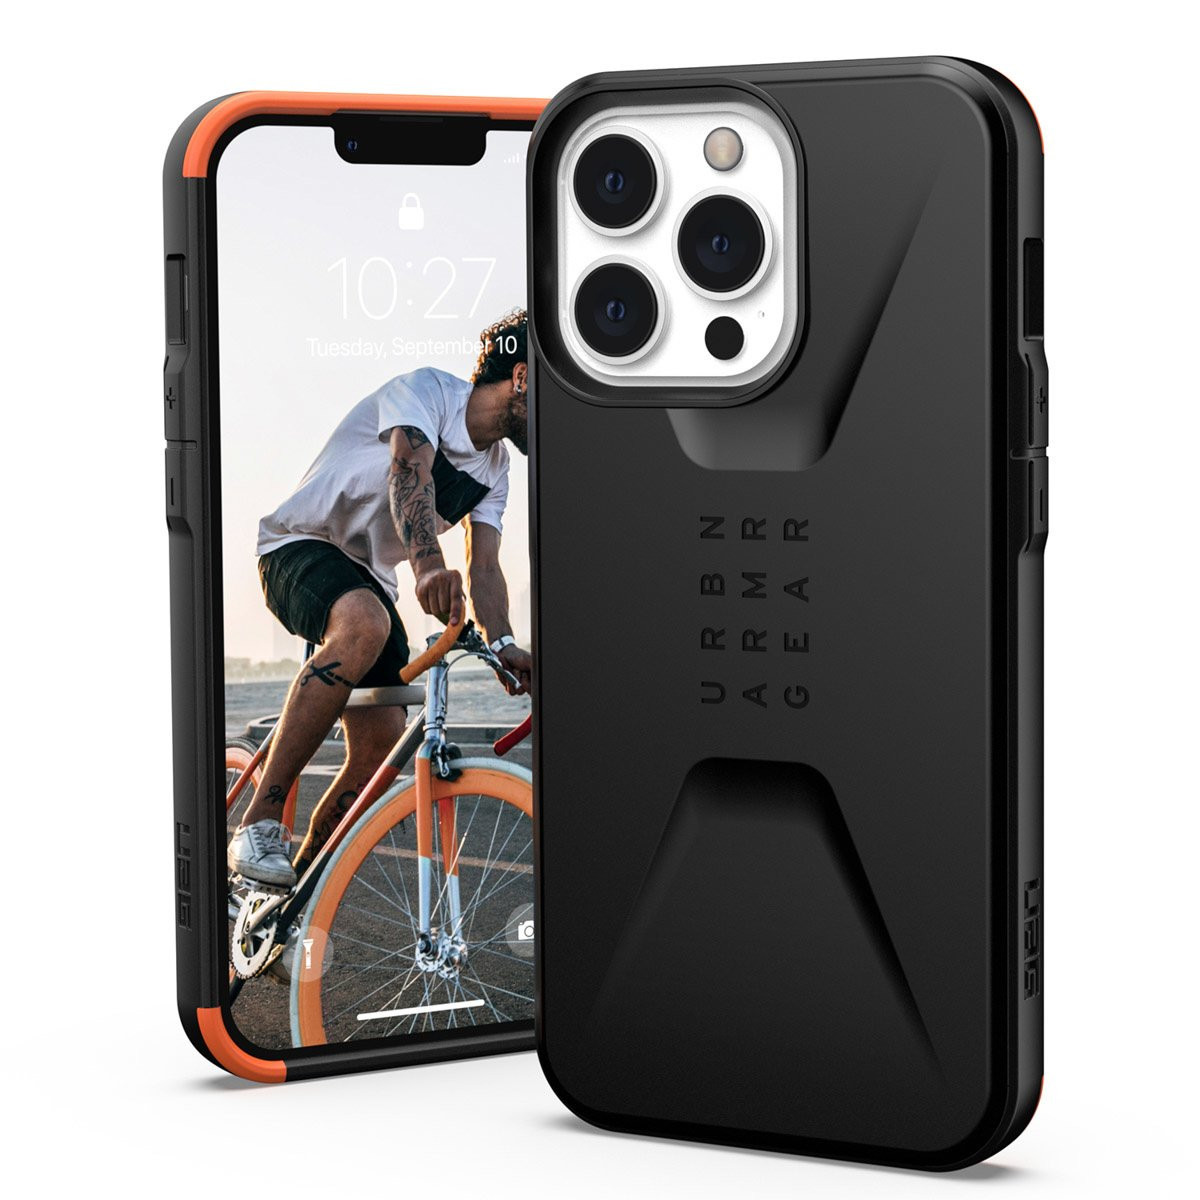 UAG - Civilian backcover hoes - iPhone 13 Pro - Zwart + Lunso Tempered Glass